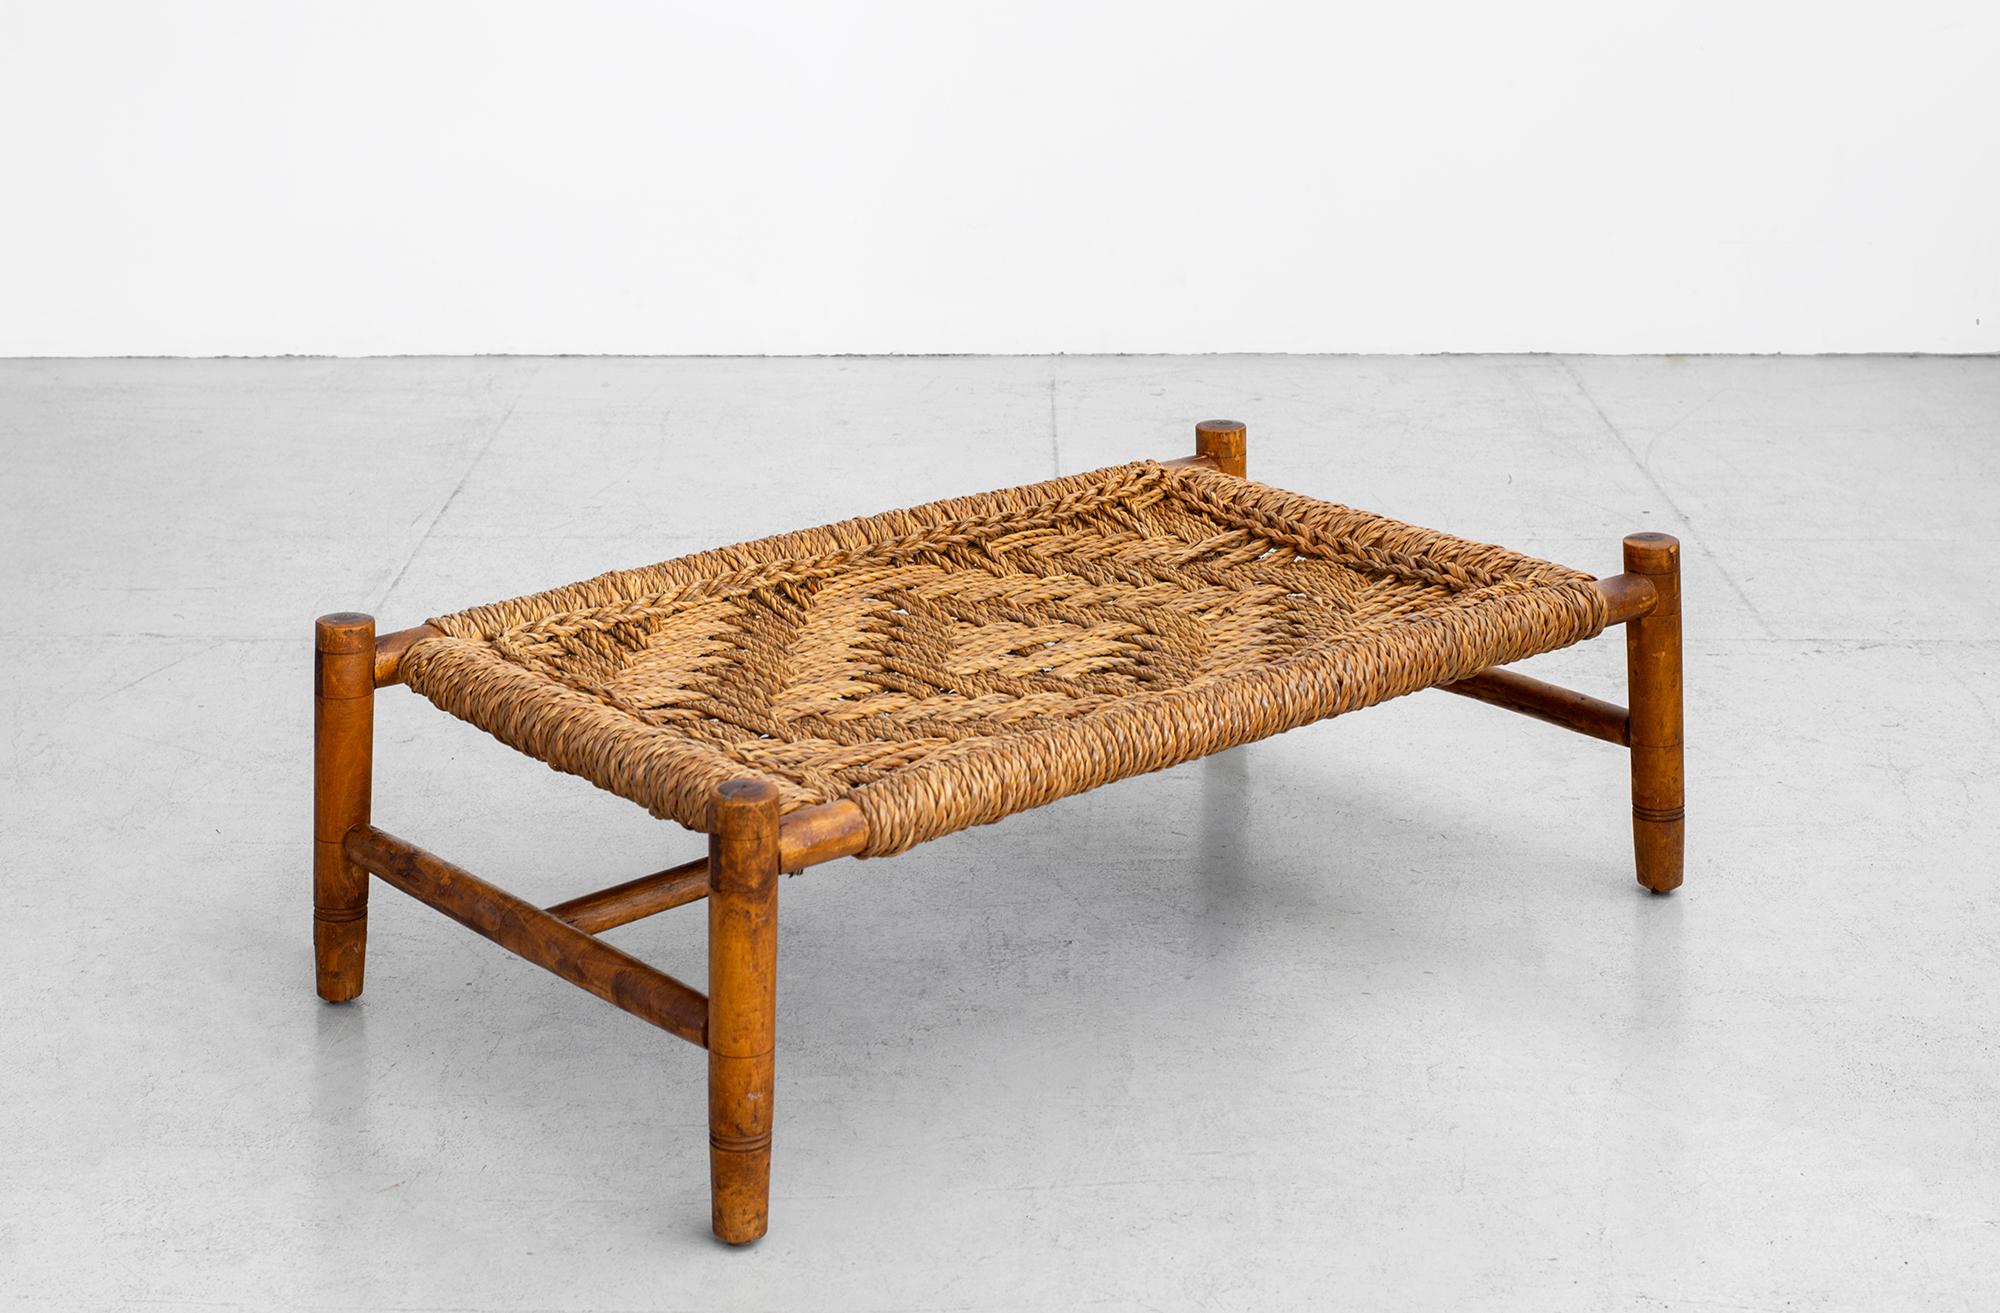 Audoux Minet coffee table with woven rope top
Could be used as a coffee table or ottoman table 
Great patina to oakwood and rope top. 

  